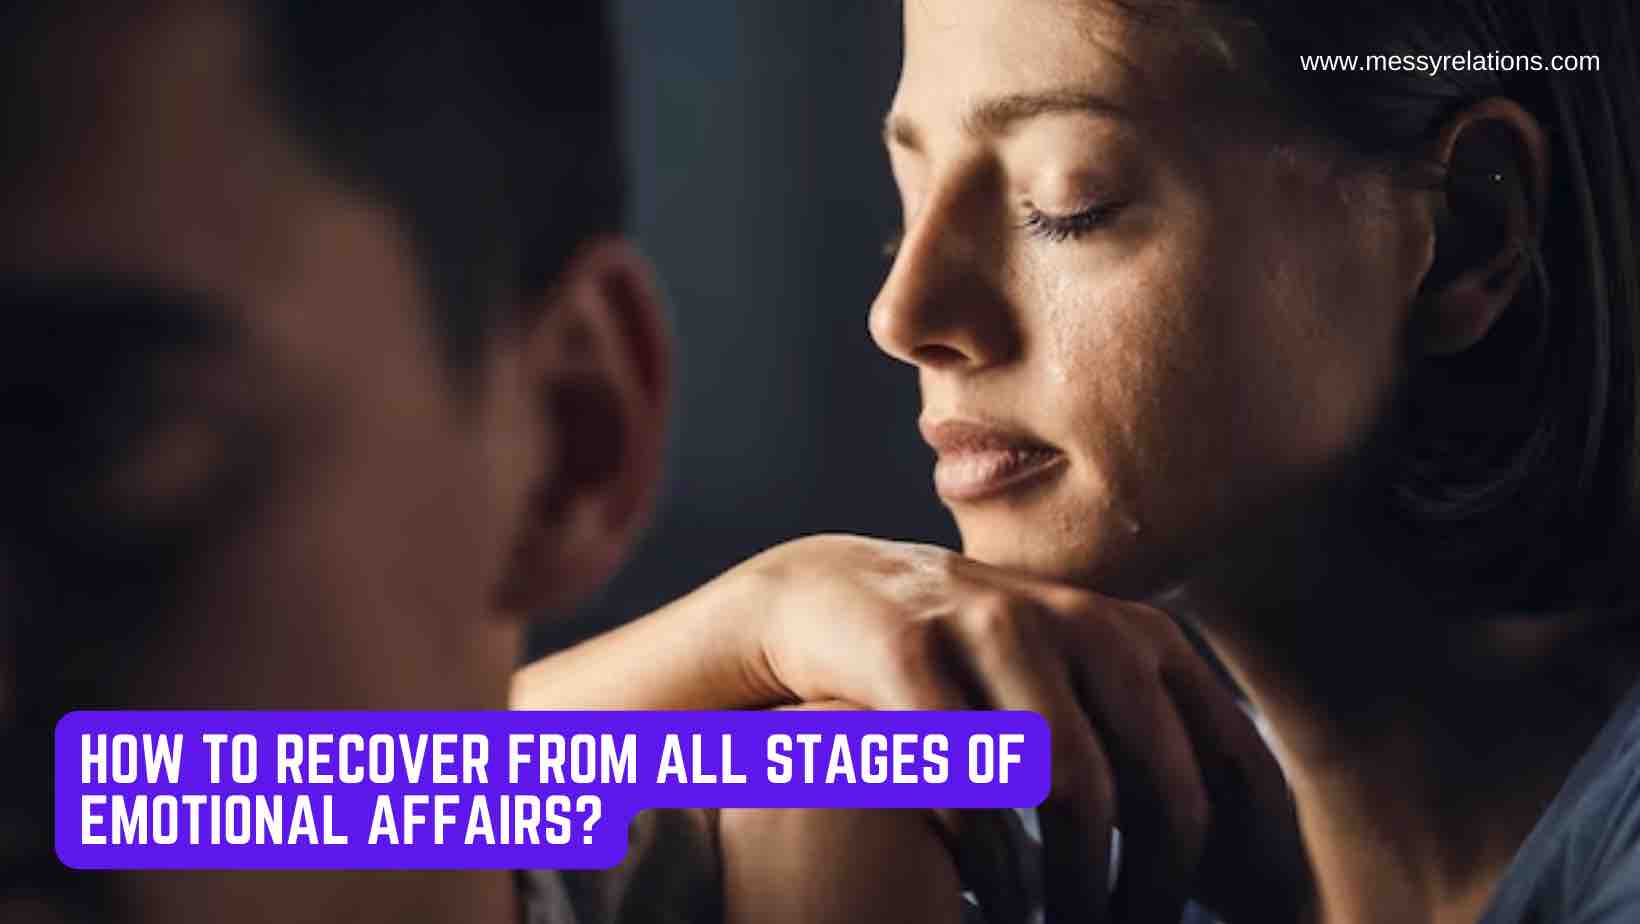 Stages of Emotional Affairs